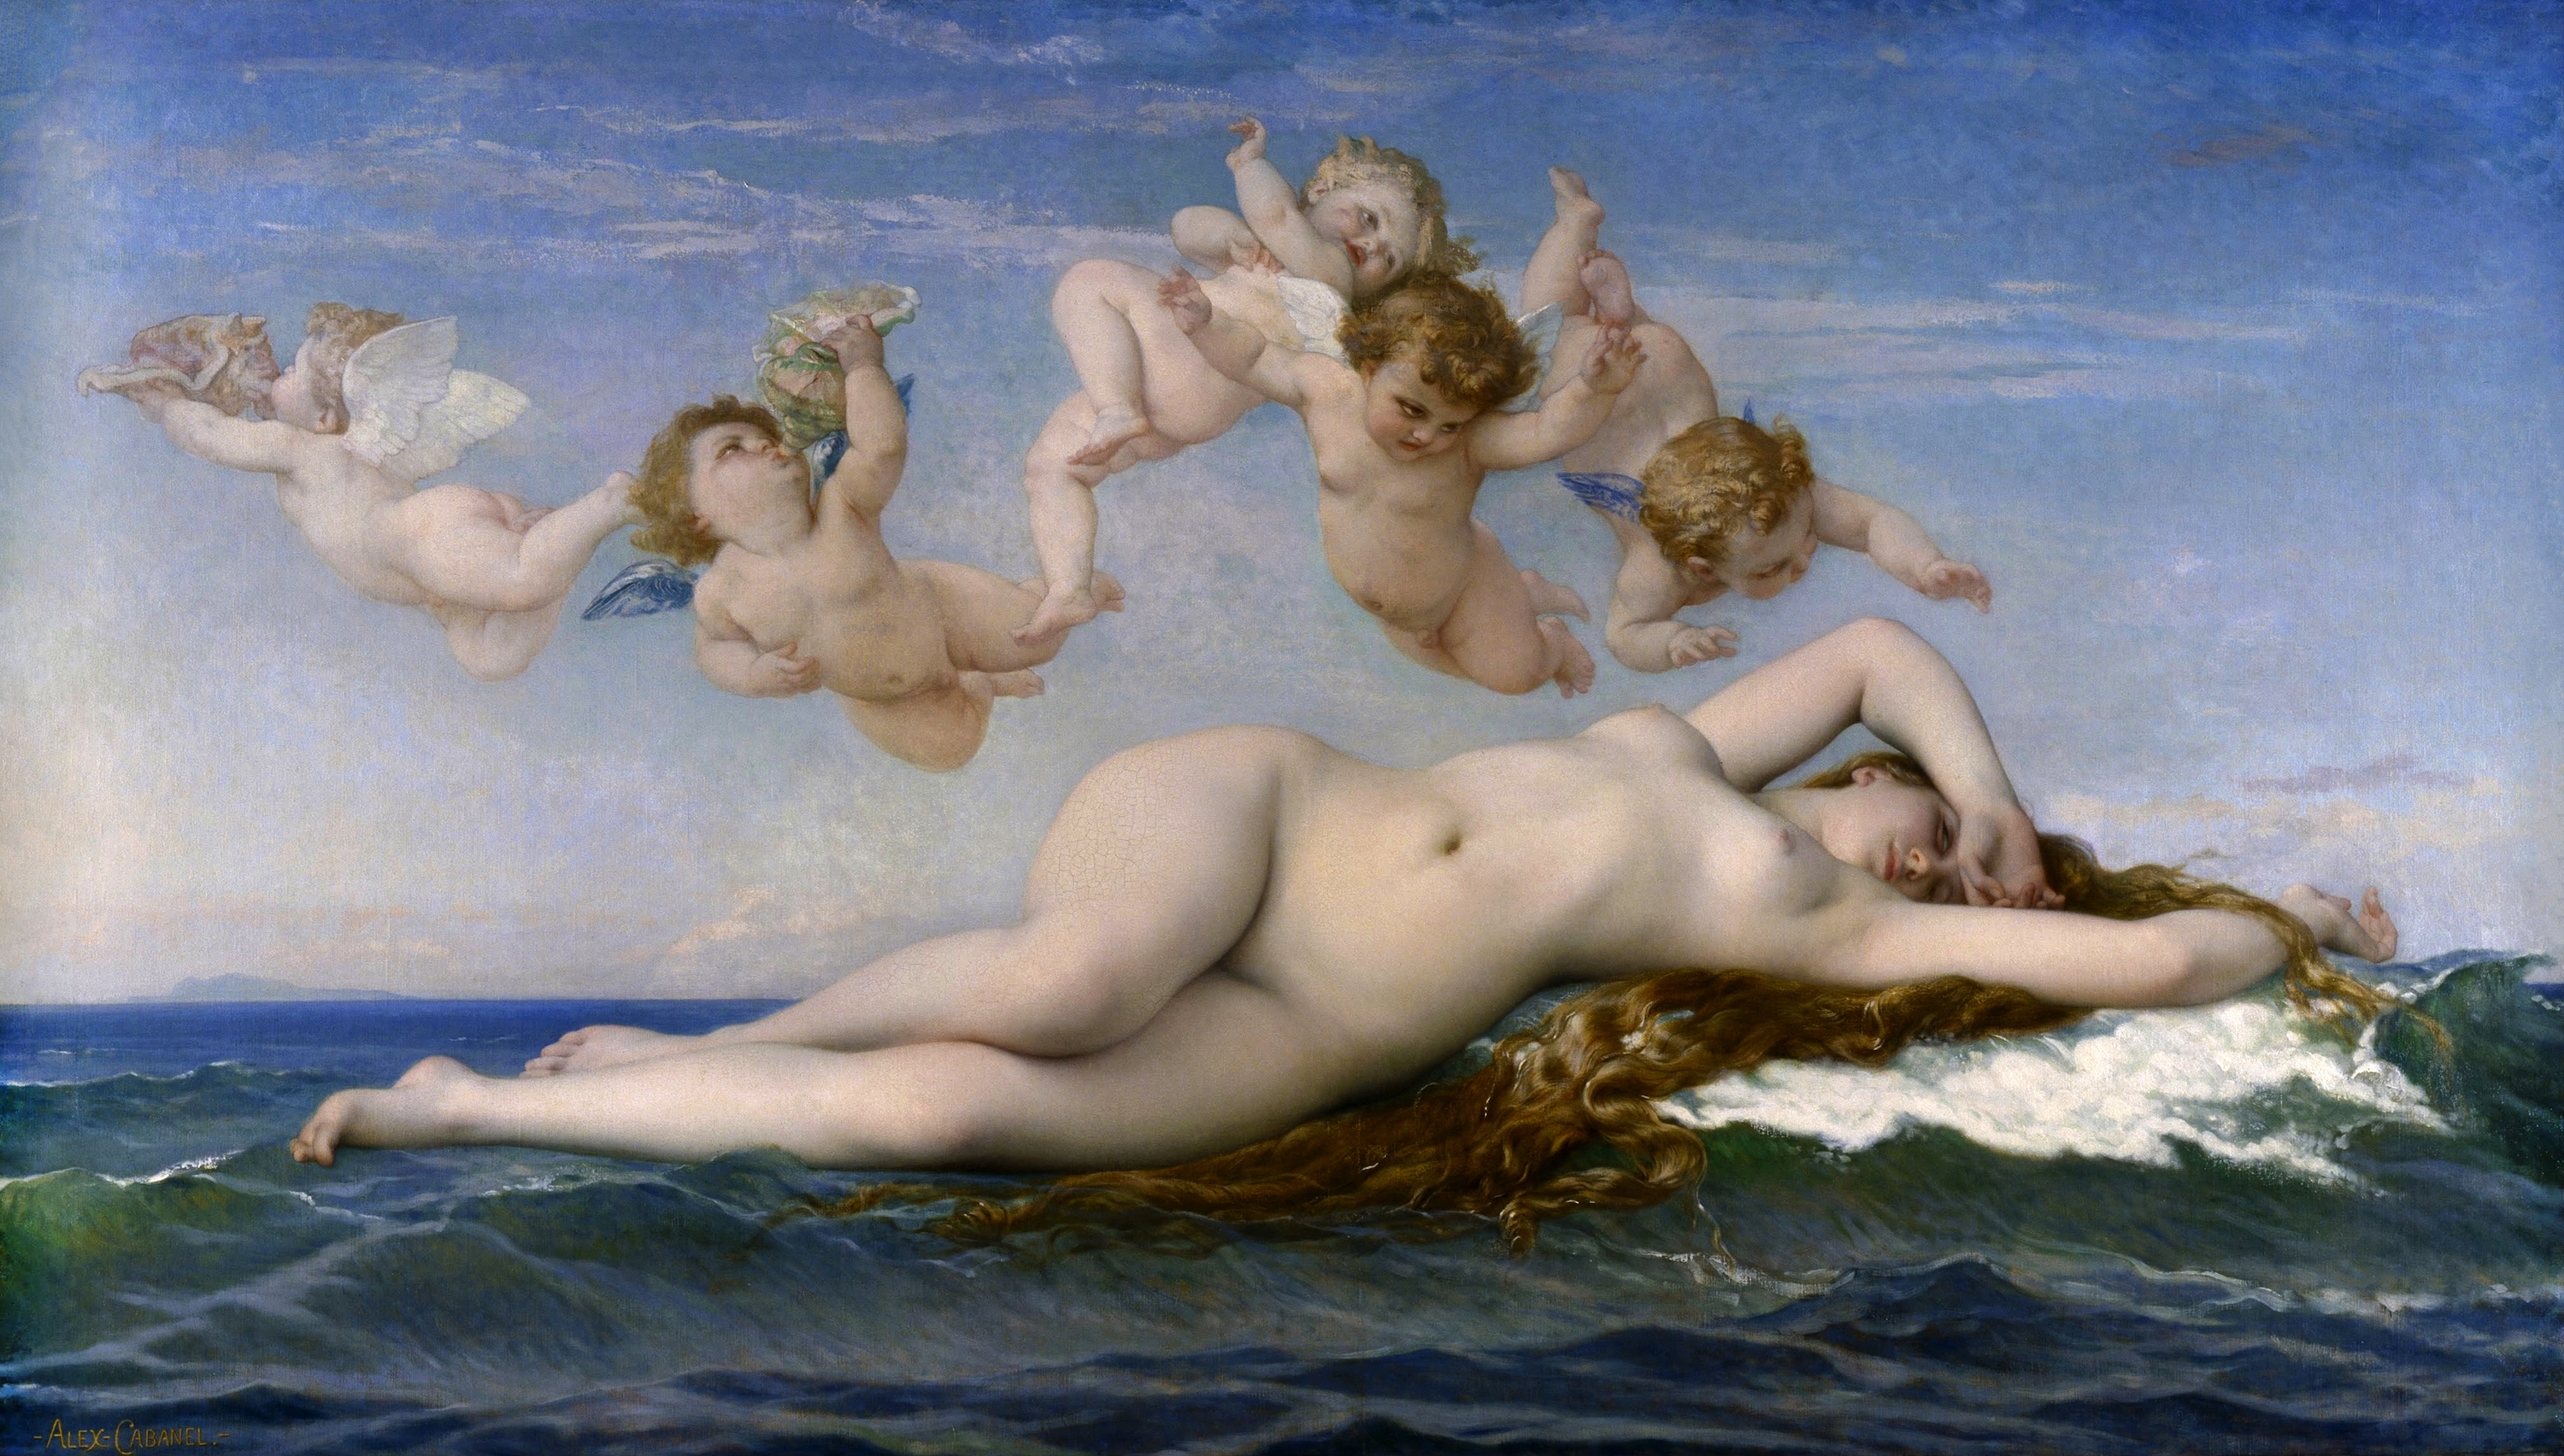 The Birth of Venus by Alexandre Cabanel - 1863 - 130 x 225 cm Musée d'Orsay